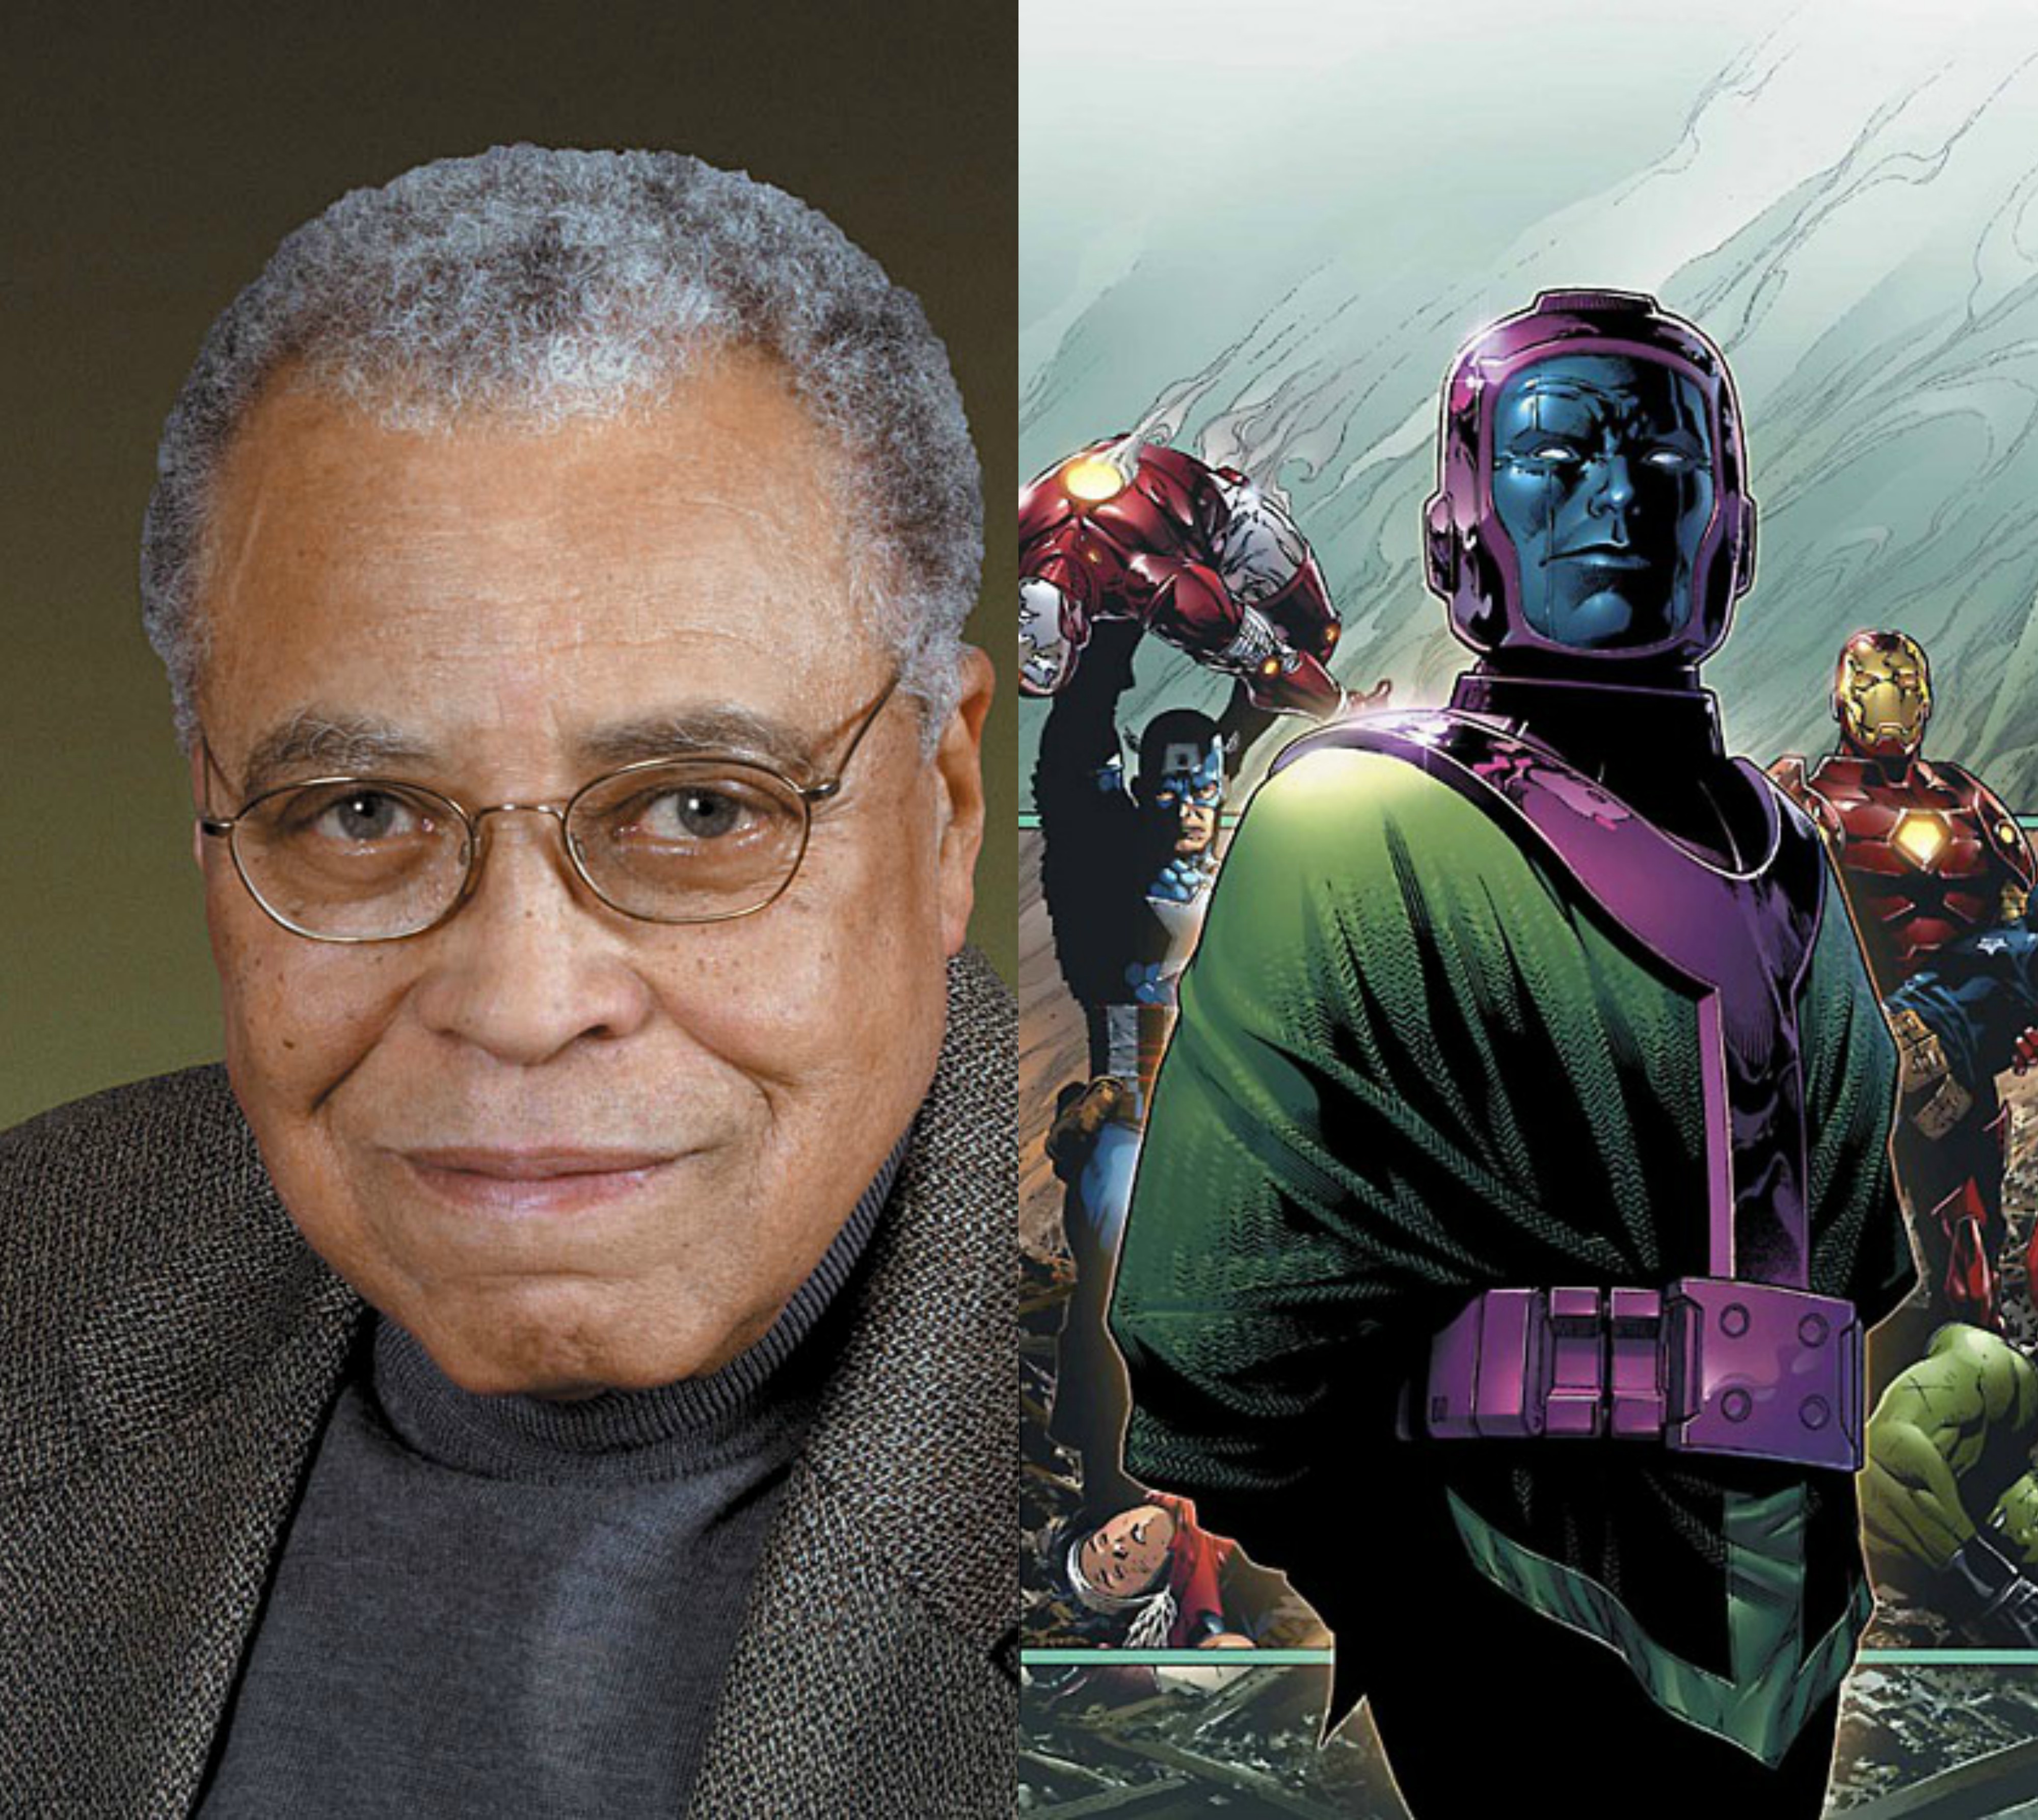 How Much Does James Earl Jones Make From Star Wars